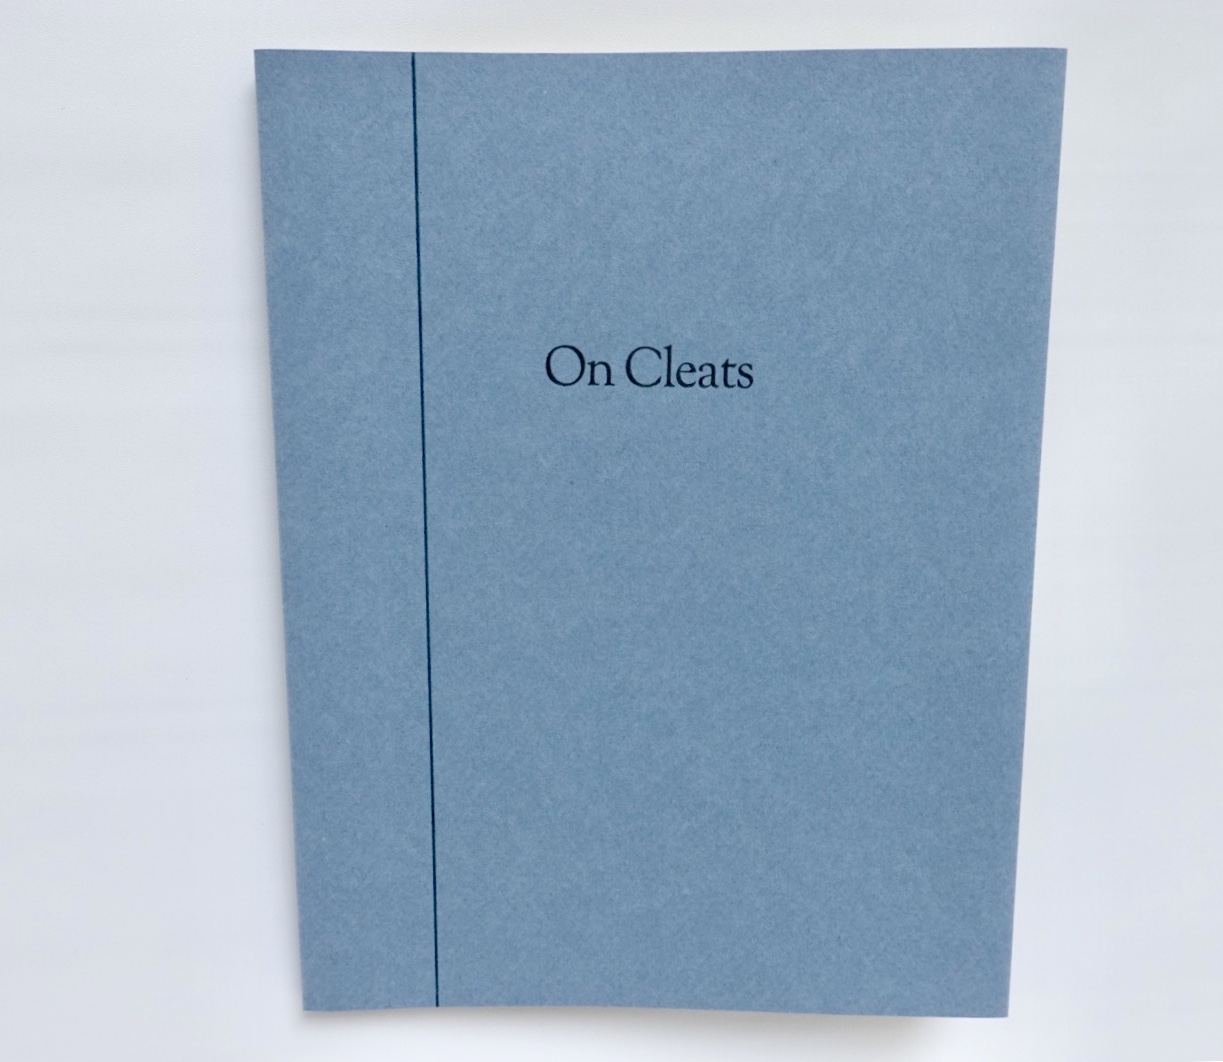 A book illustrating an original poem using woodcut relief and letterpress hand sewn and bound in mi-tient paper.